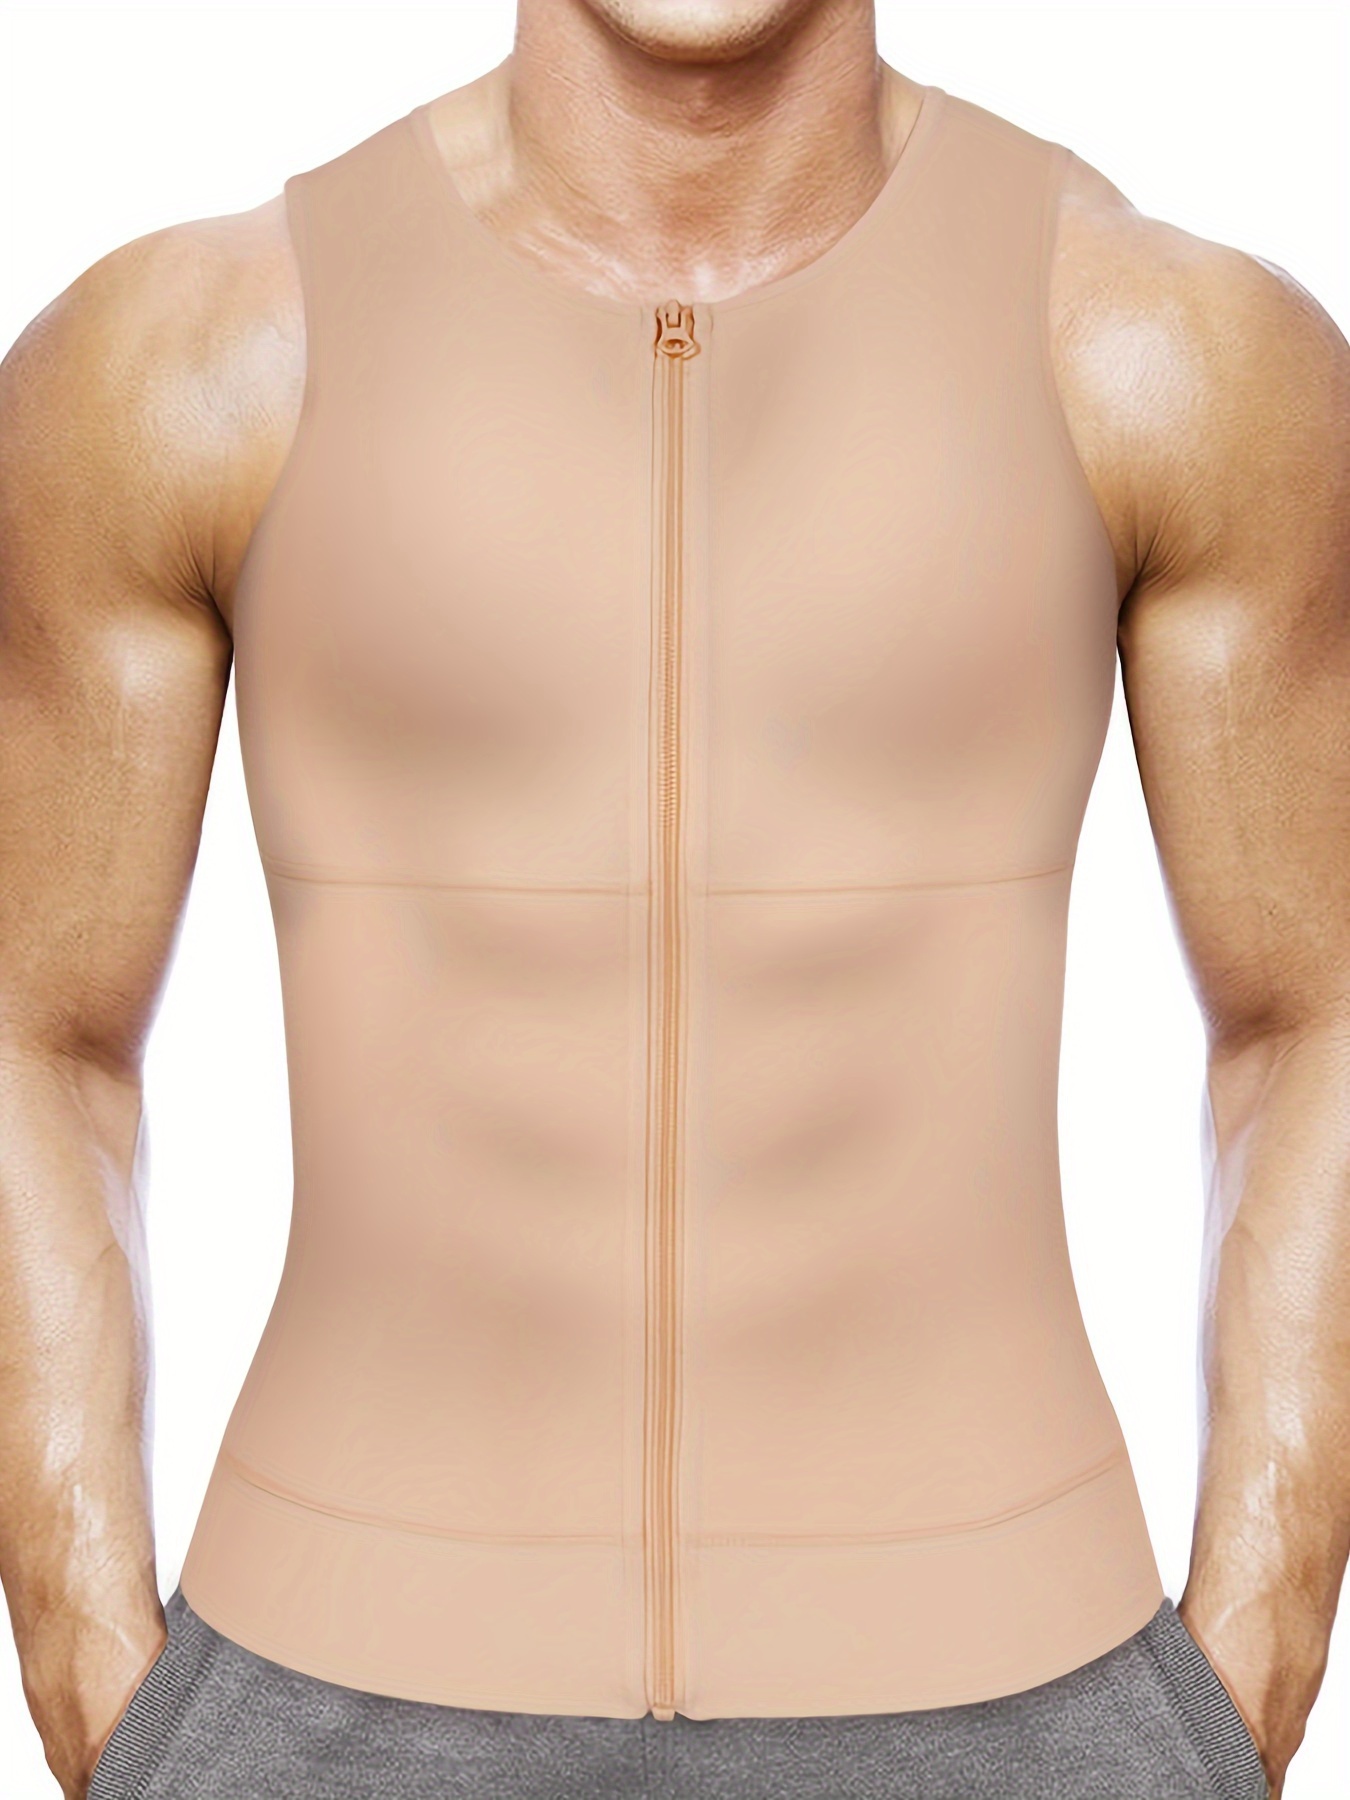 Men's Compression Shapewear Chest Binder Crop Top Body Shaper Breathable  Stretch Slimming Tight Undershirt Workout Vest Tank Top